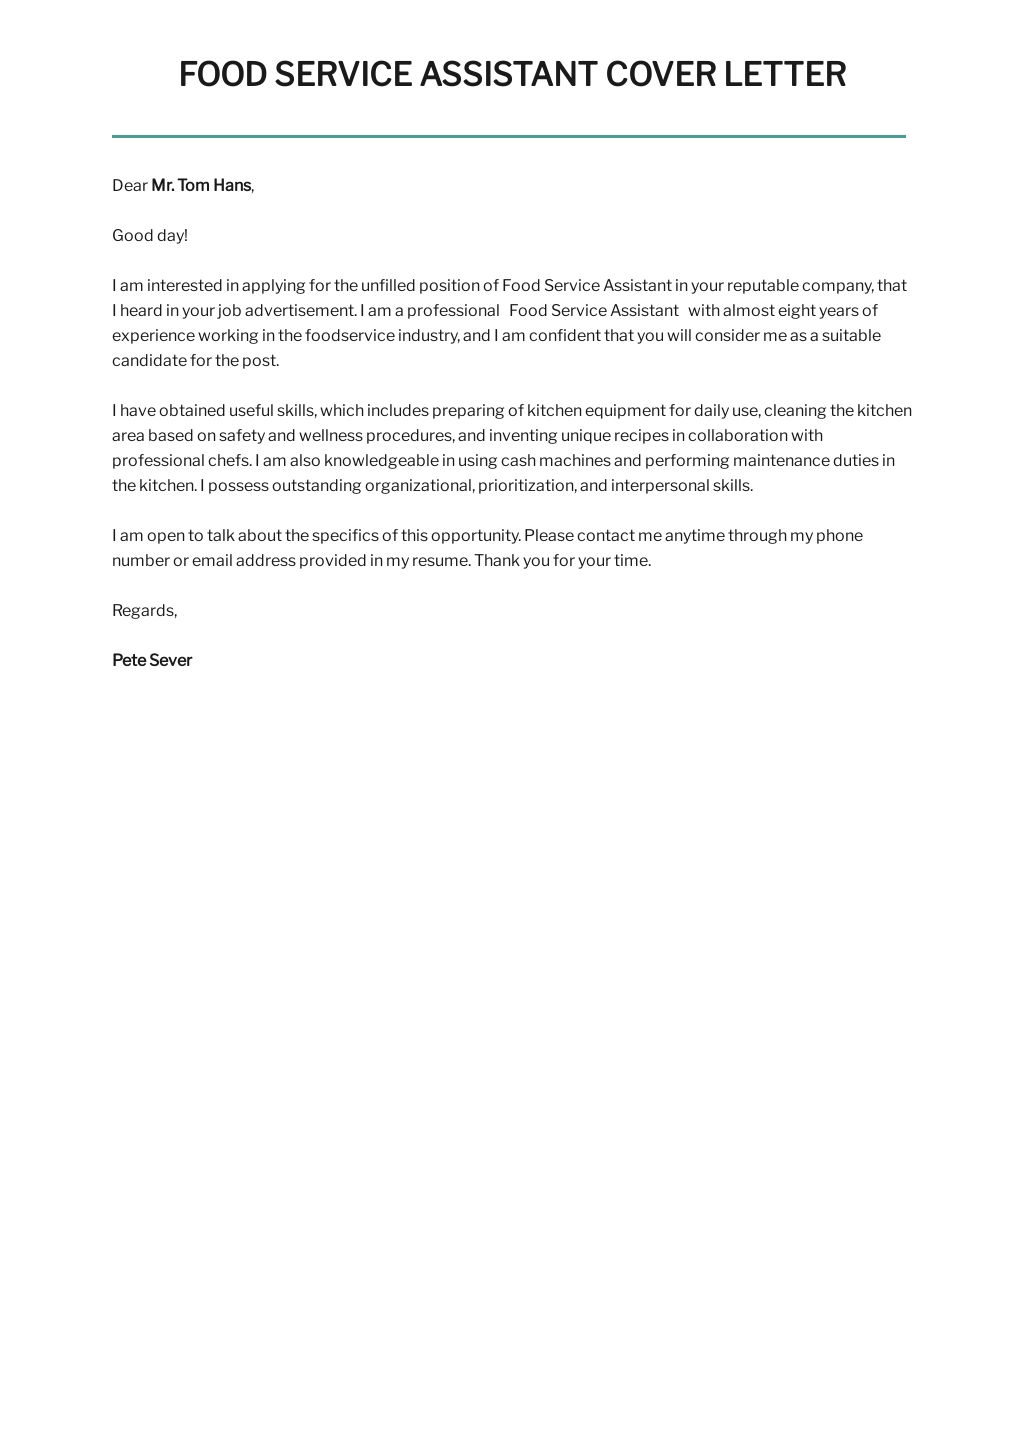 Free Food Service Assistant Cover Letter Template.jpe